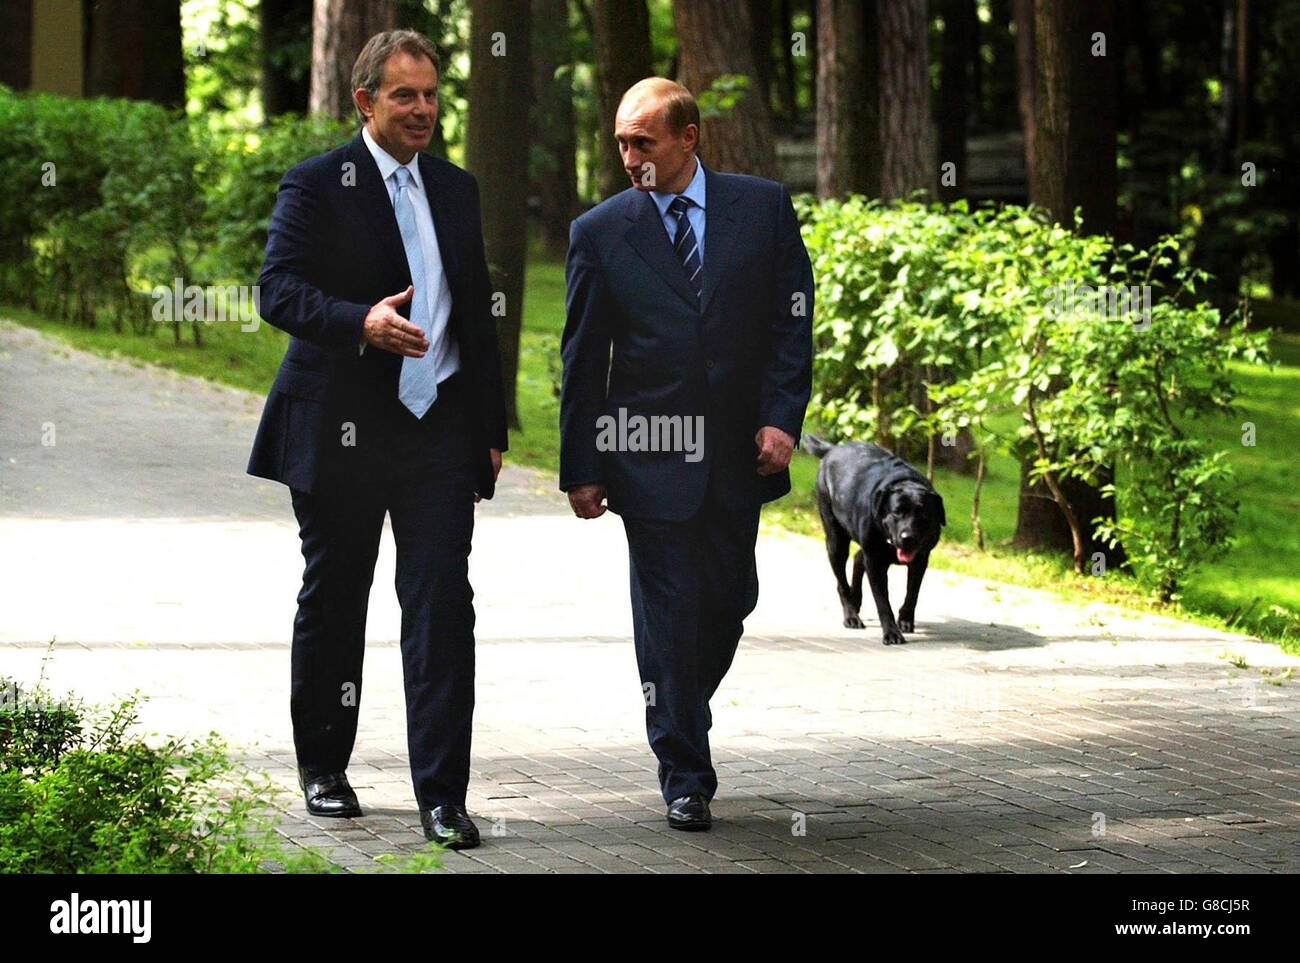 Britain's Prime Minister Tony Blair (left) walks with Russian President Vladimir Putin and his dog Konie at his private dacha outside Moscow. Mr Blair conceded today that he was taking over the presidency of the EU at 'an interesting time' for Europe as he joined Mr Putin at the start of a hectic diplomatic week that ends with a crunch EU summit in Brussels. Stock Photo